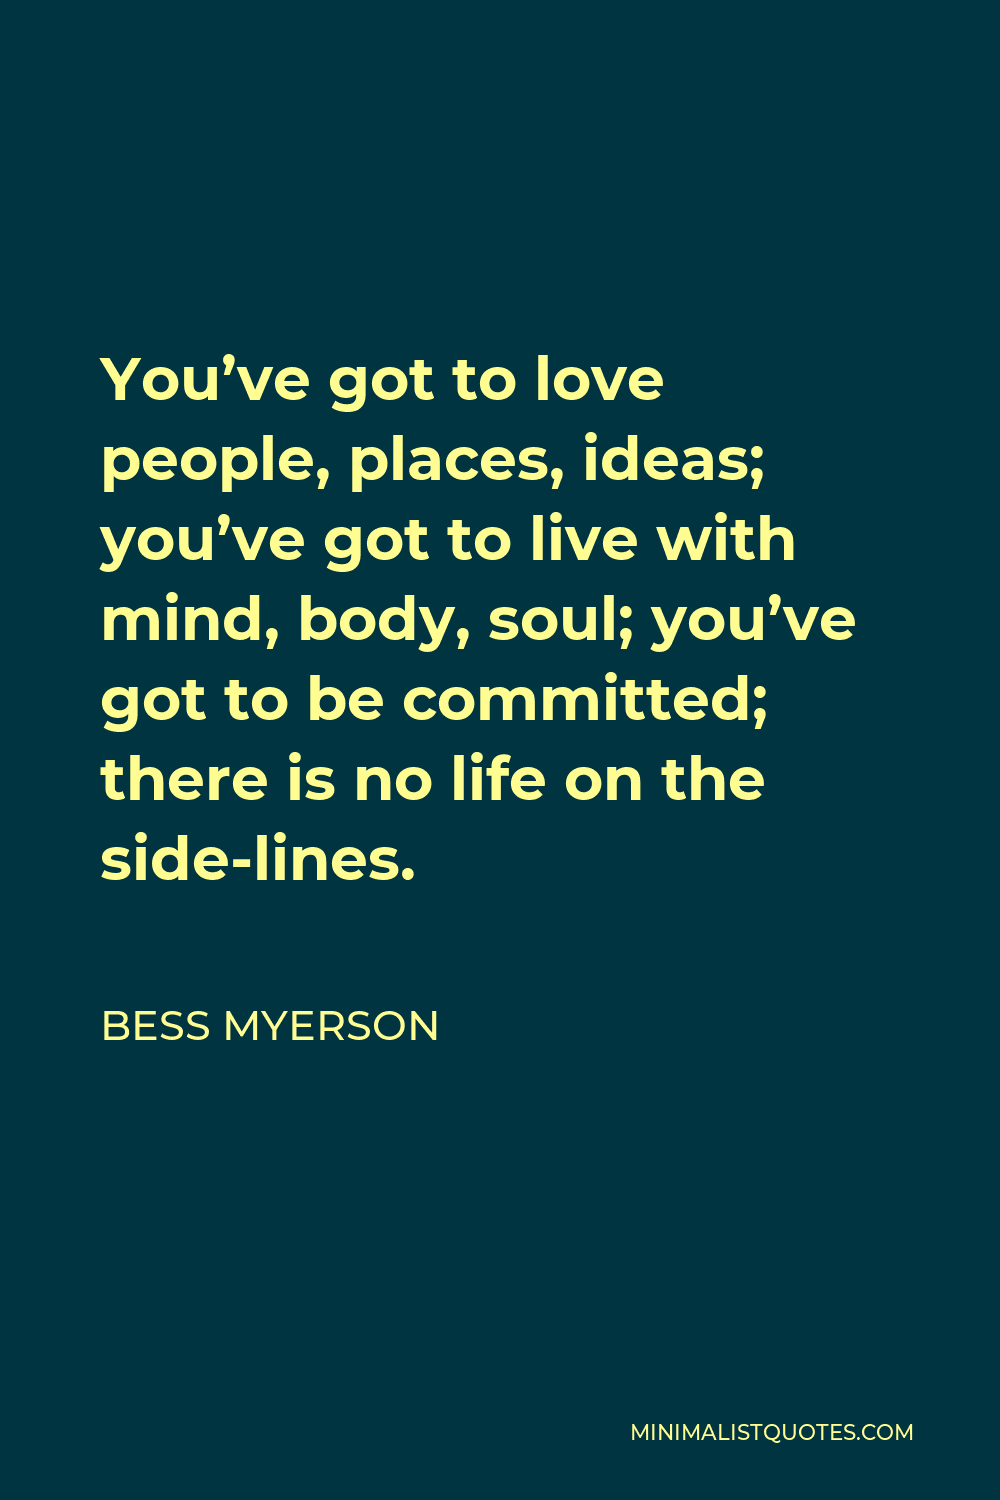 Bess Myerson Quote - You’ve got to love people, places, ideas; you’ve got to live with mind, body, soul; you’ve got to be committed; there is no life on the side-lines.